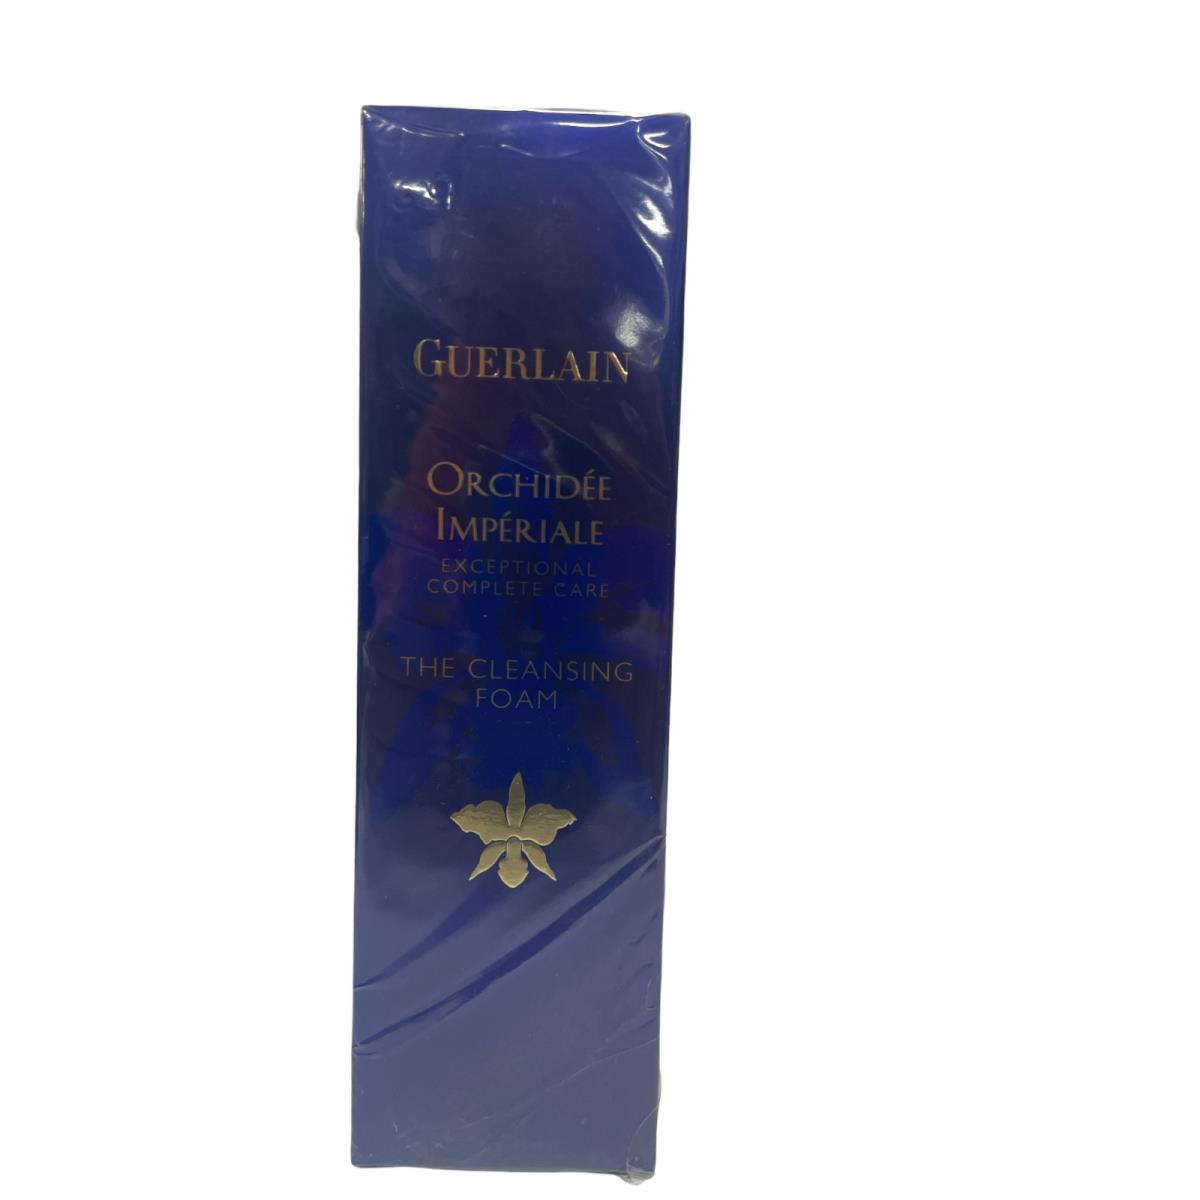 Guerlain Orchidee Imperiale The Cleansing Foam 125mL / 4.2oz